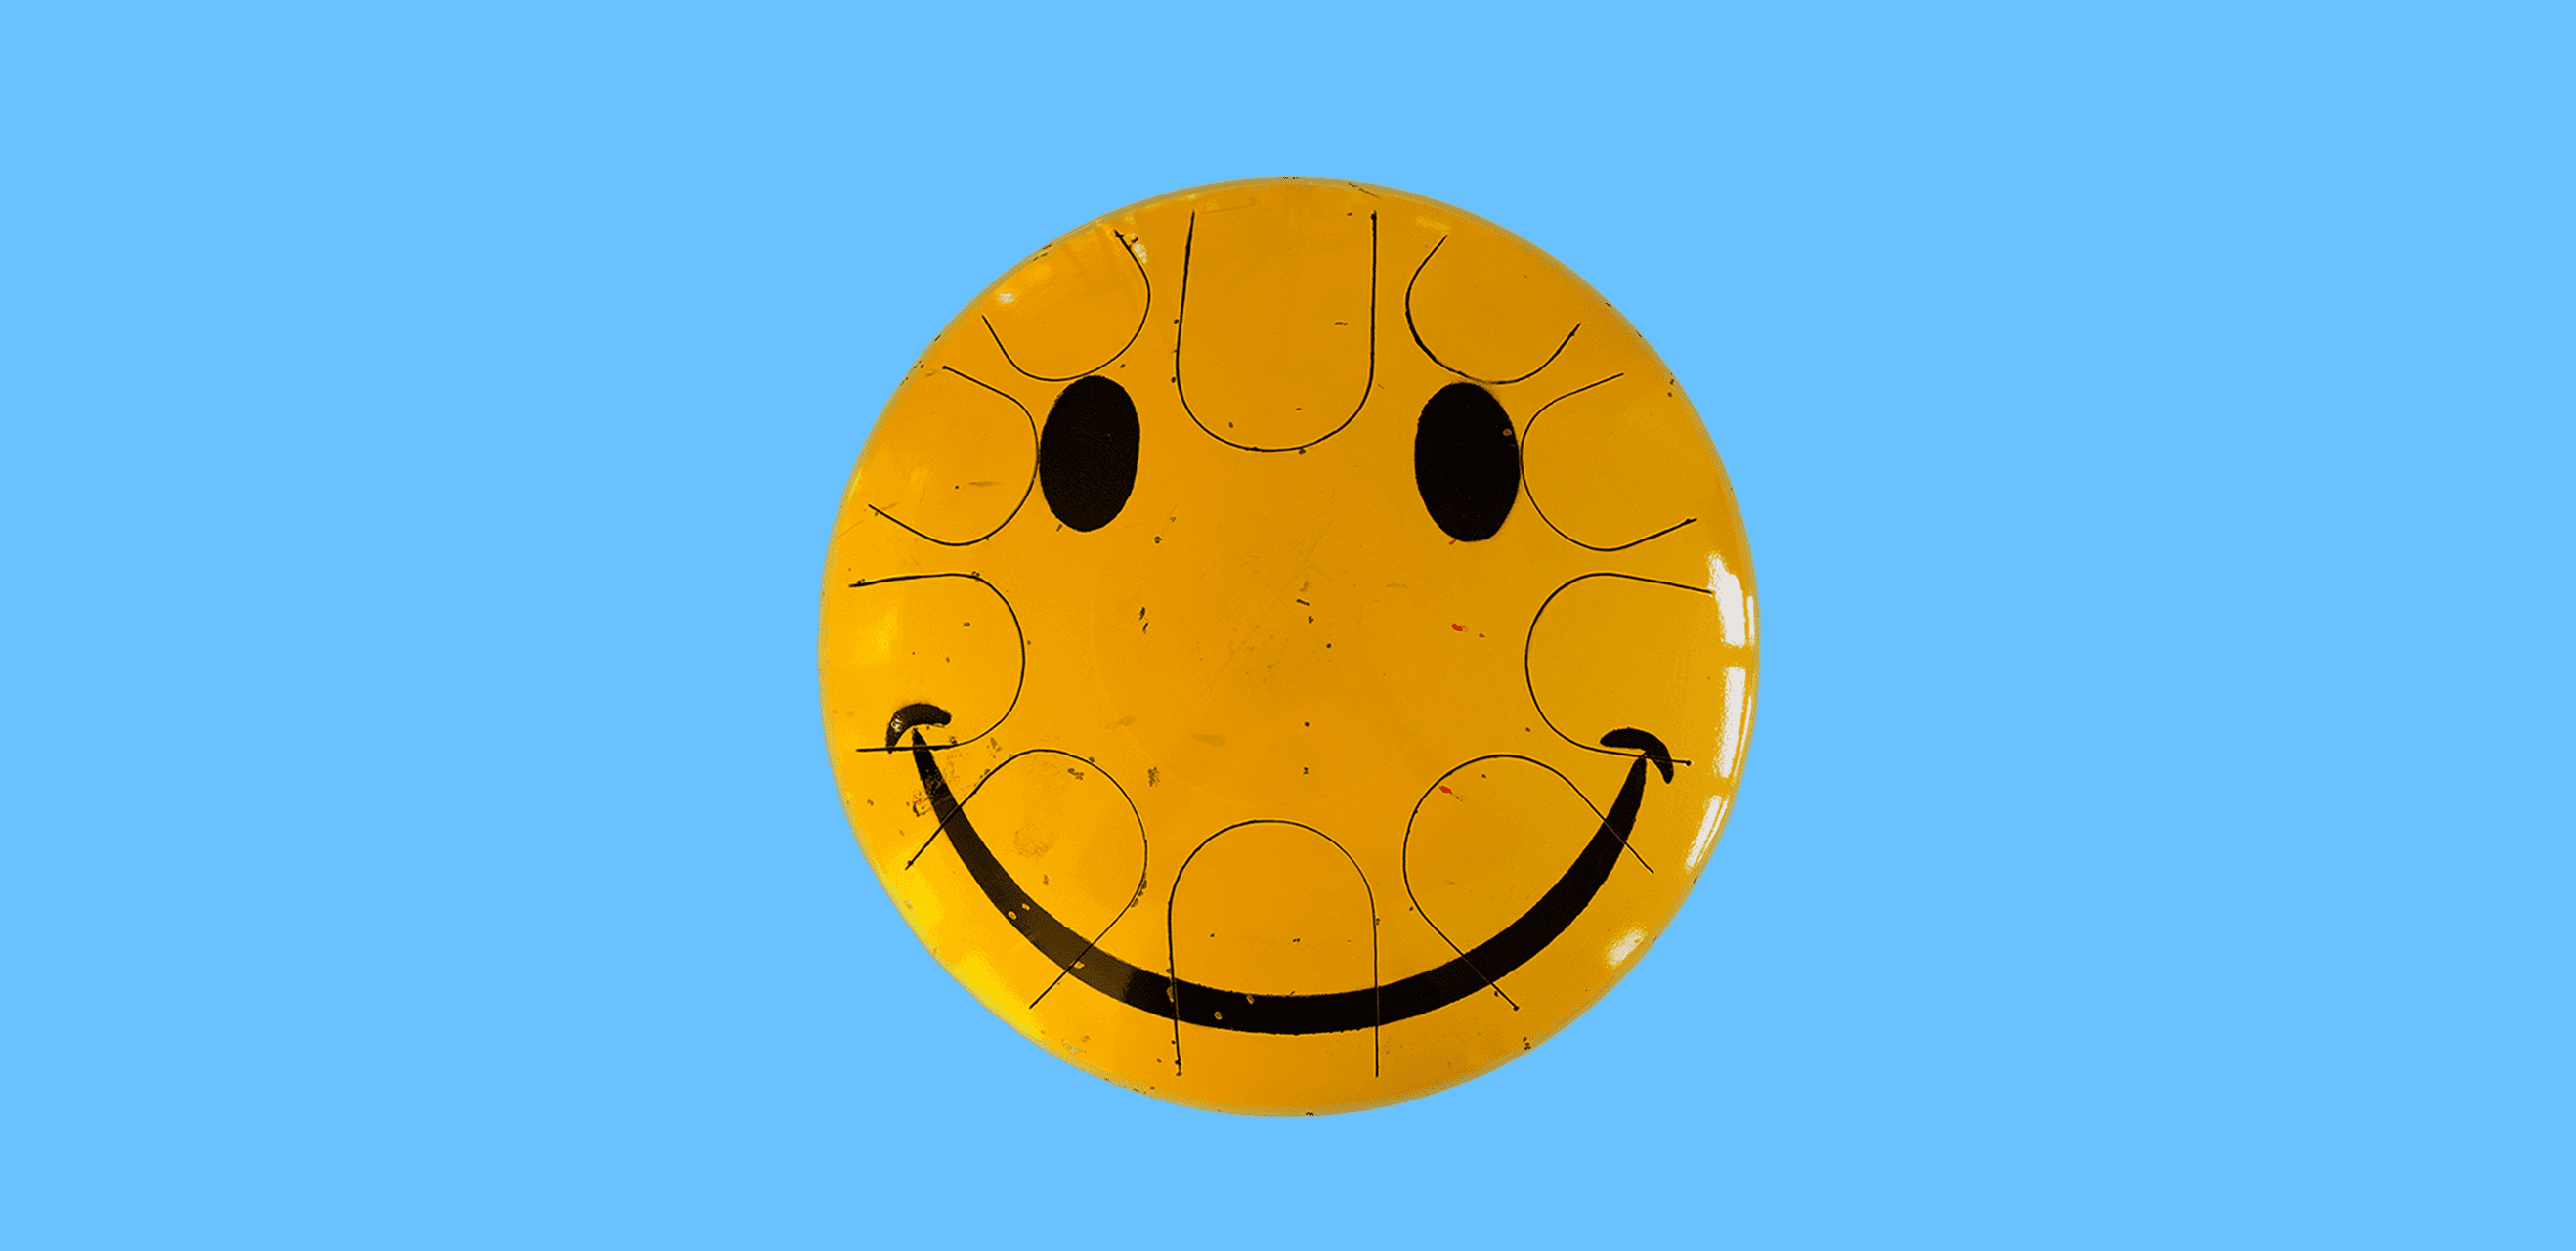 The Free Smiley Drum is Available Now!